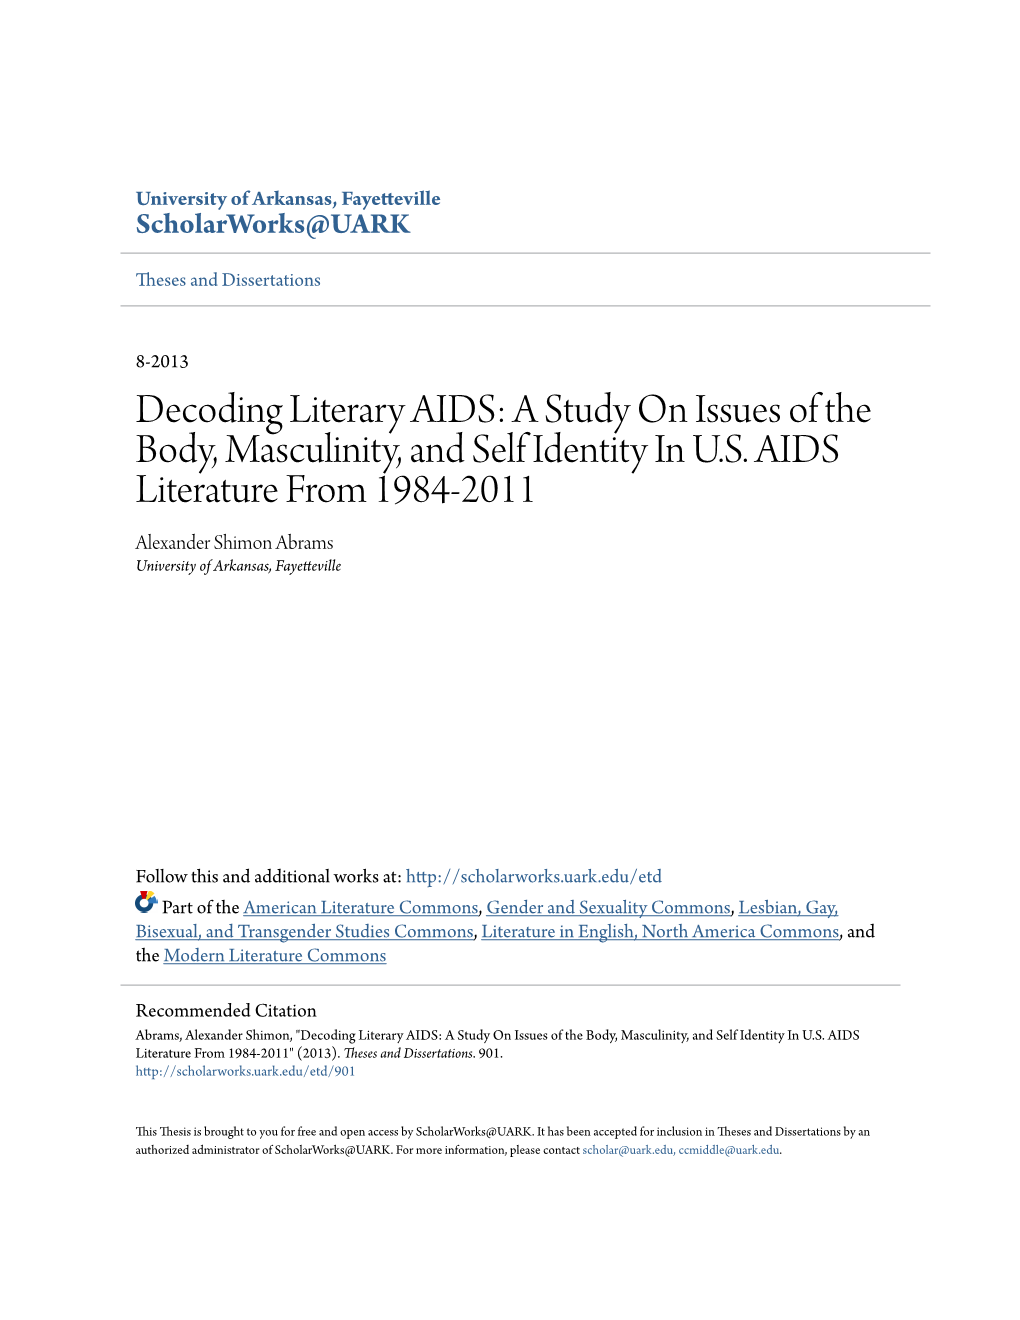 Decoding Literary AIDS: a Study on Issues of the Body, Masculinity, and Self Identity in U.S